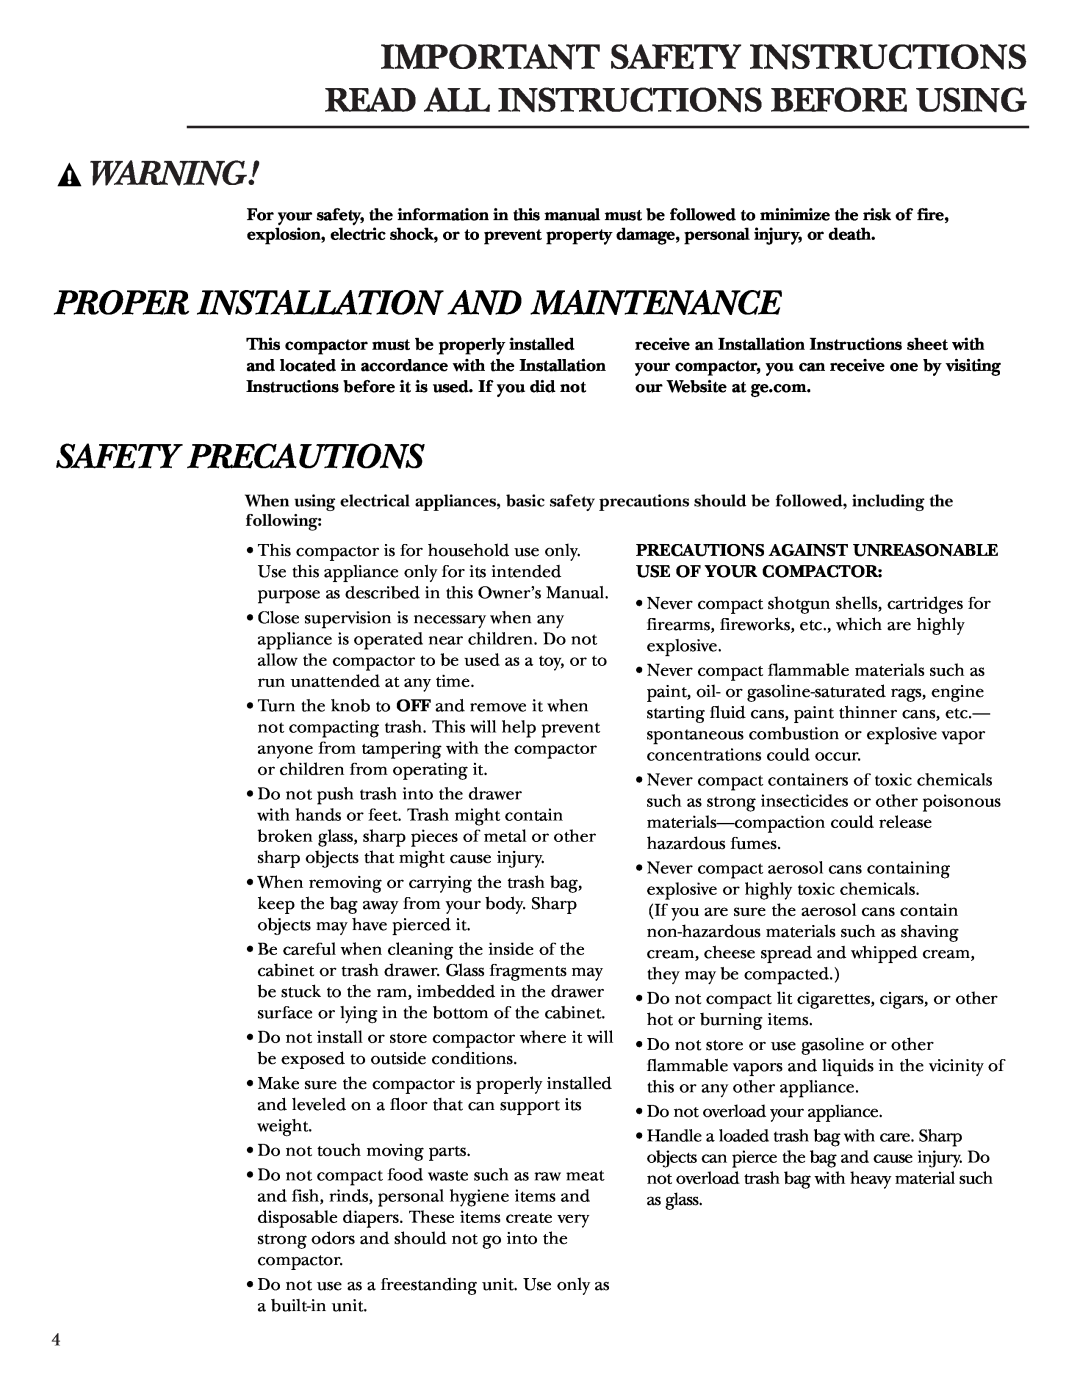 GE Monogram ZCGP150 Important Safety Instructions Read All Instructions Before Using, Proper Installation And Maintenance 